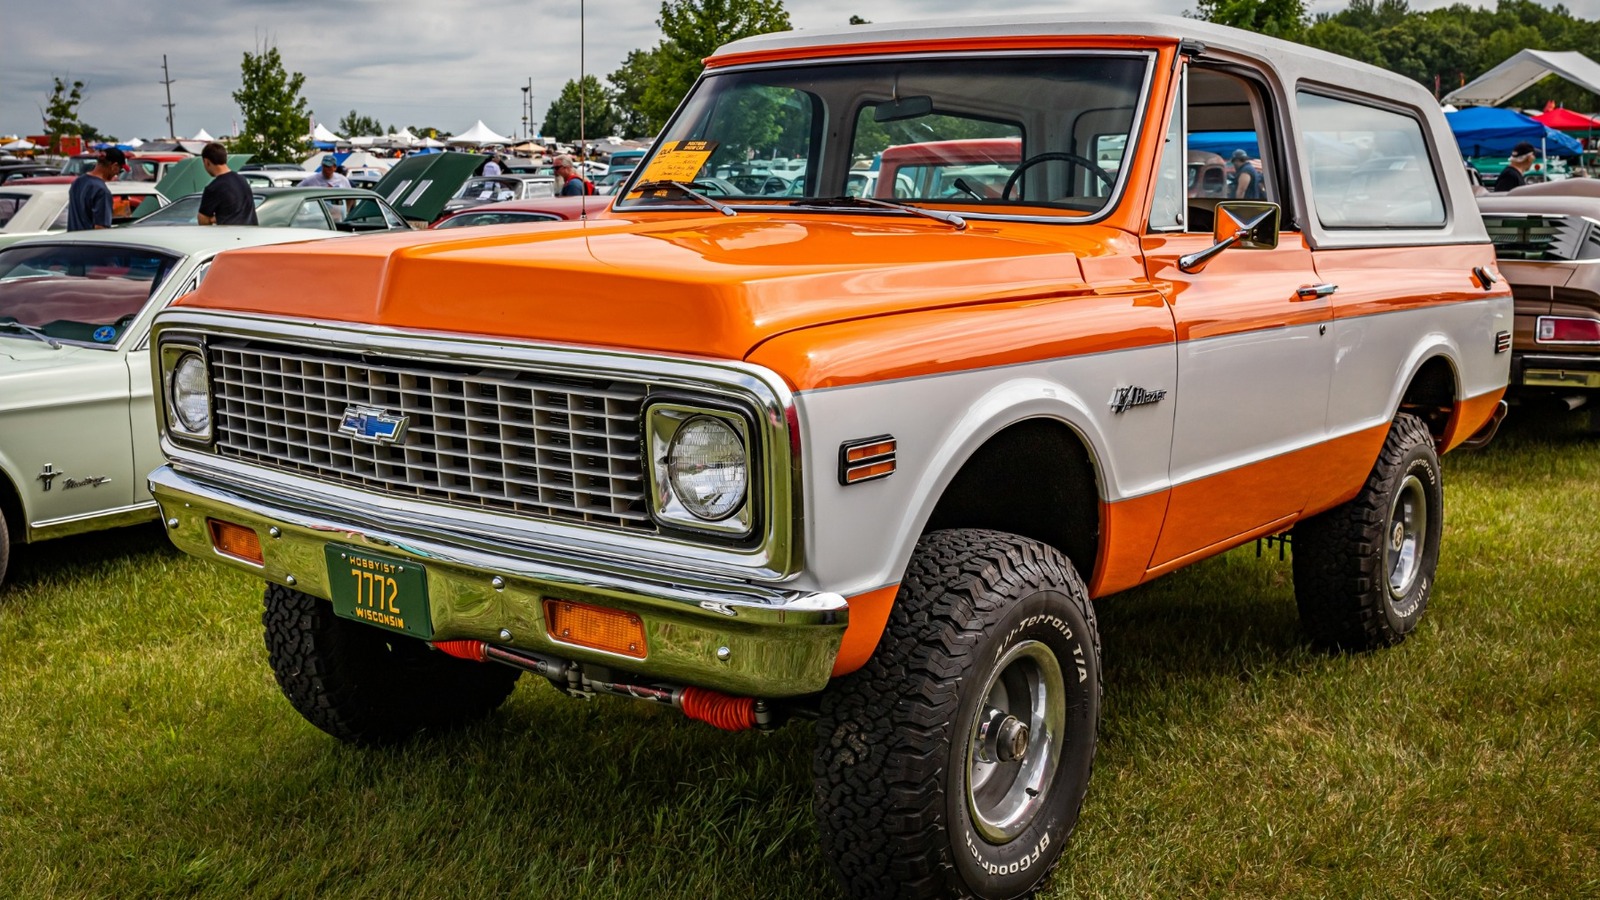 8 Of The Coolest And Most Unique Features Of The Original Chevy K5 Blazer – SlashGear